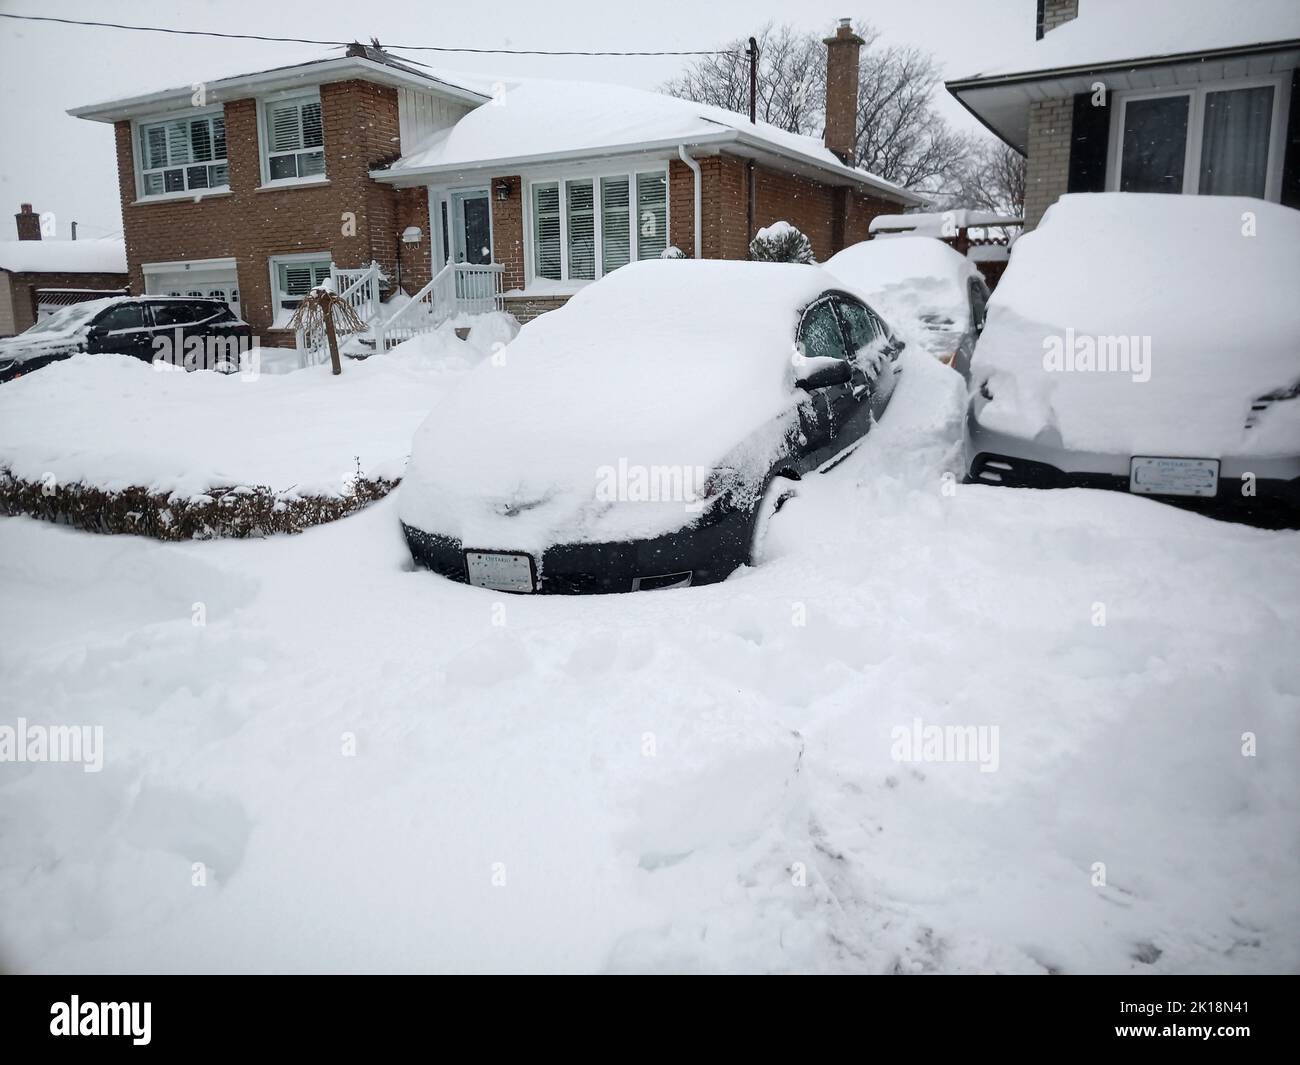 Cars and homes covered with snow after a winter snowstorm, Toronto ...